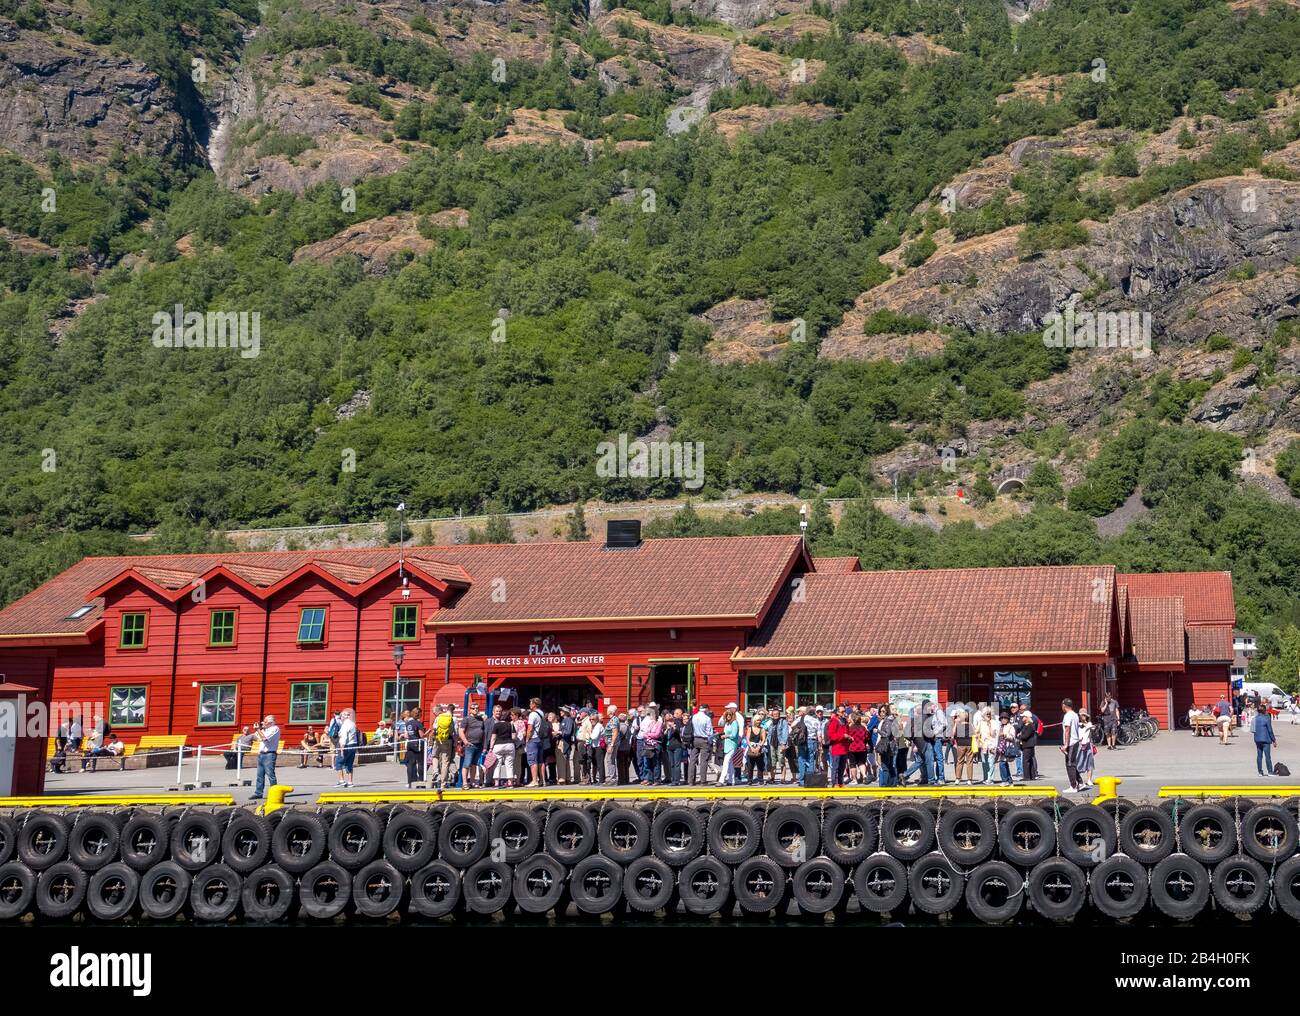 Flåm, tourists at the TICKETS & VISITOR CENTER, red wooden house, pier for ships, rock faces, trees, Sogn og Fjordane, Norway, Scandinavia, Europe Stock Photo